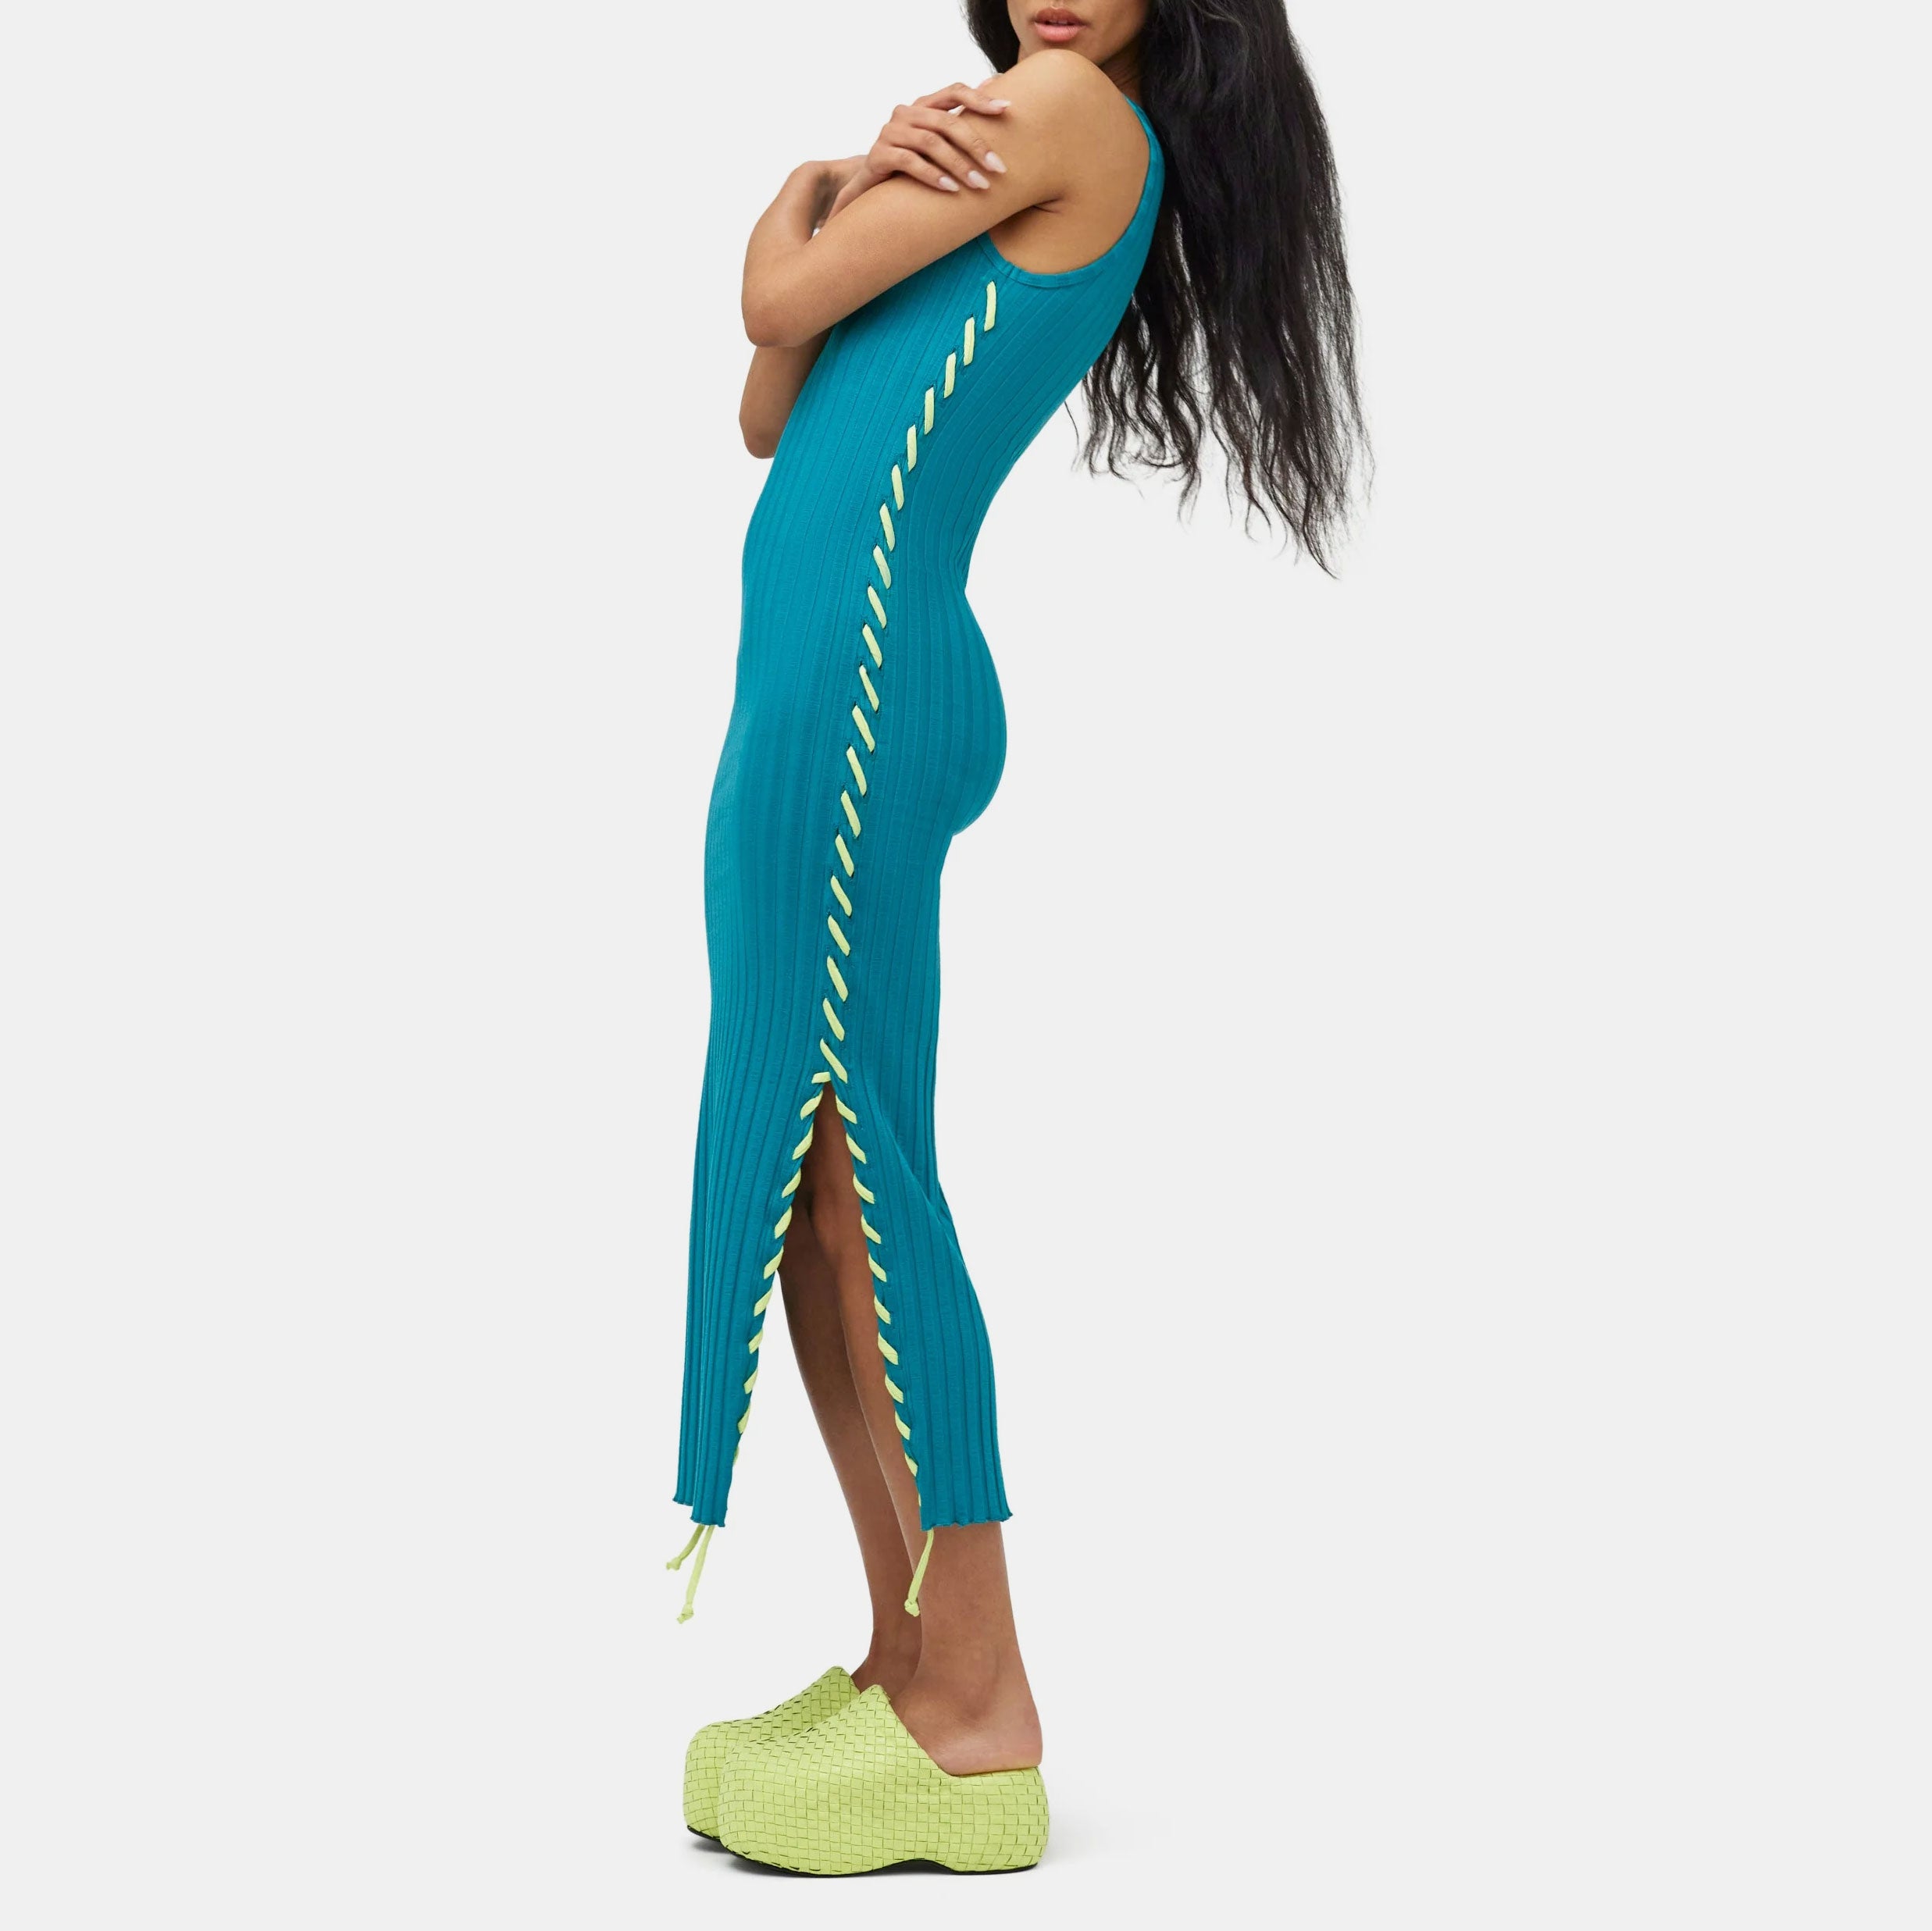 Full body photo of model wearing the teal green ribbed Blix Dress, a sleeveless ribbed dress with fluorescent green oversized stitching detail along the sides - left side view.